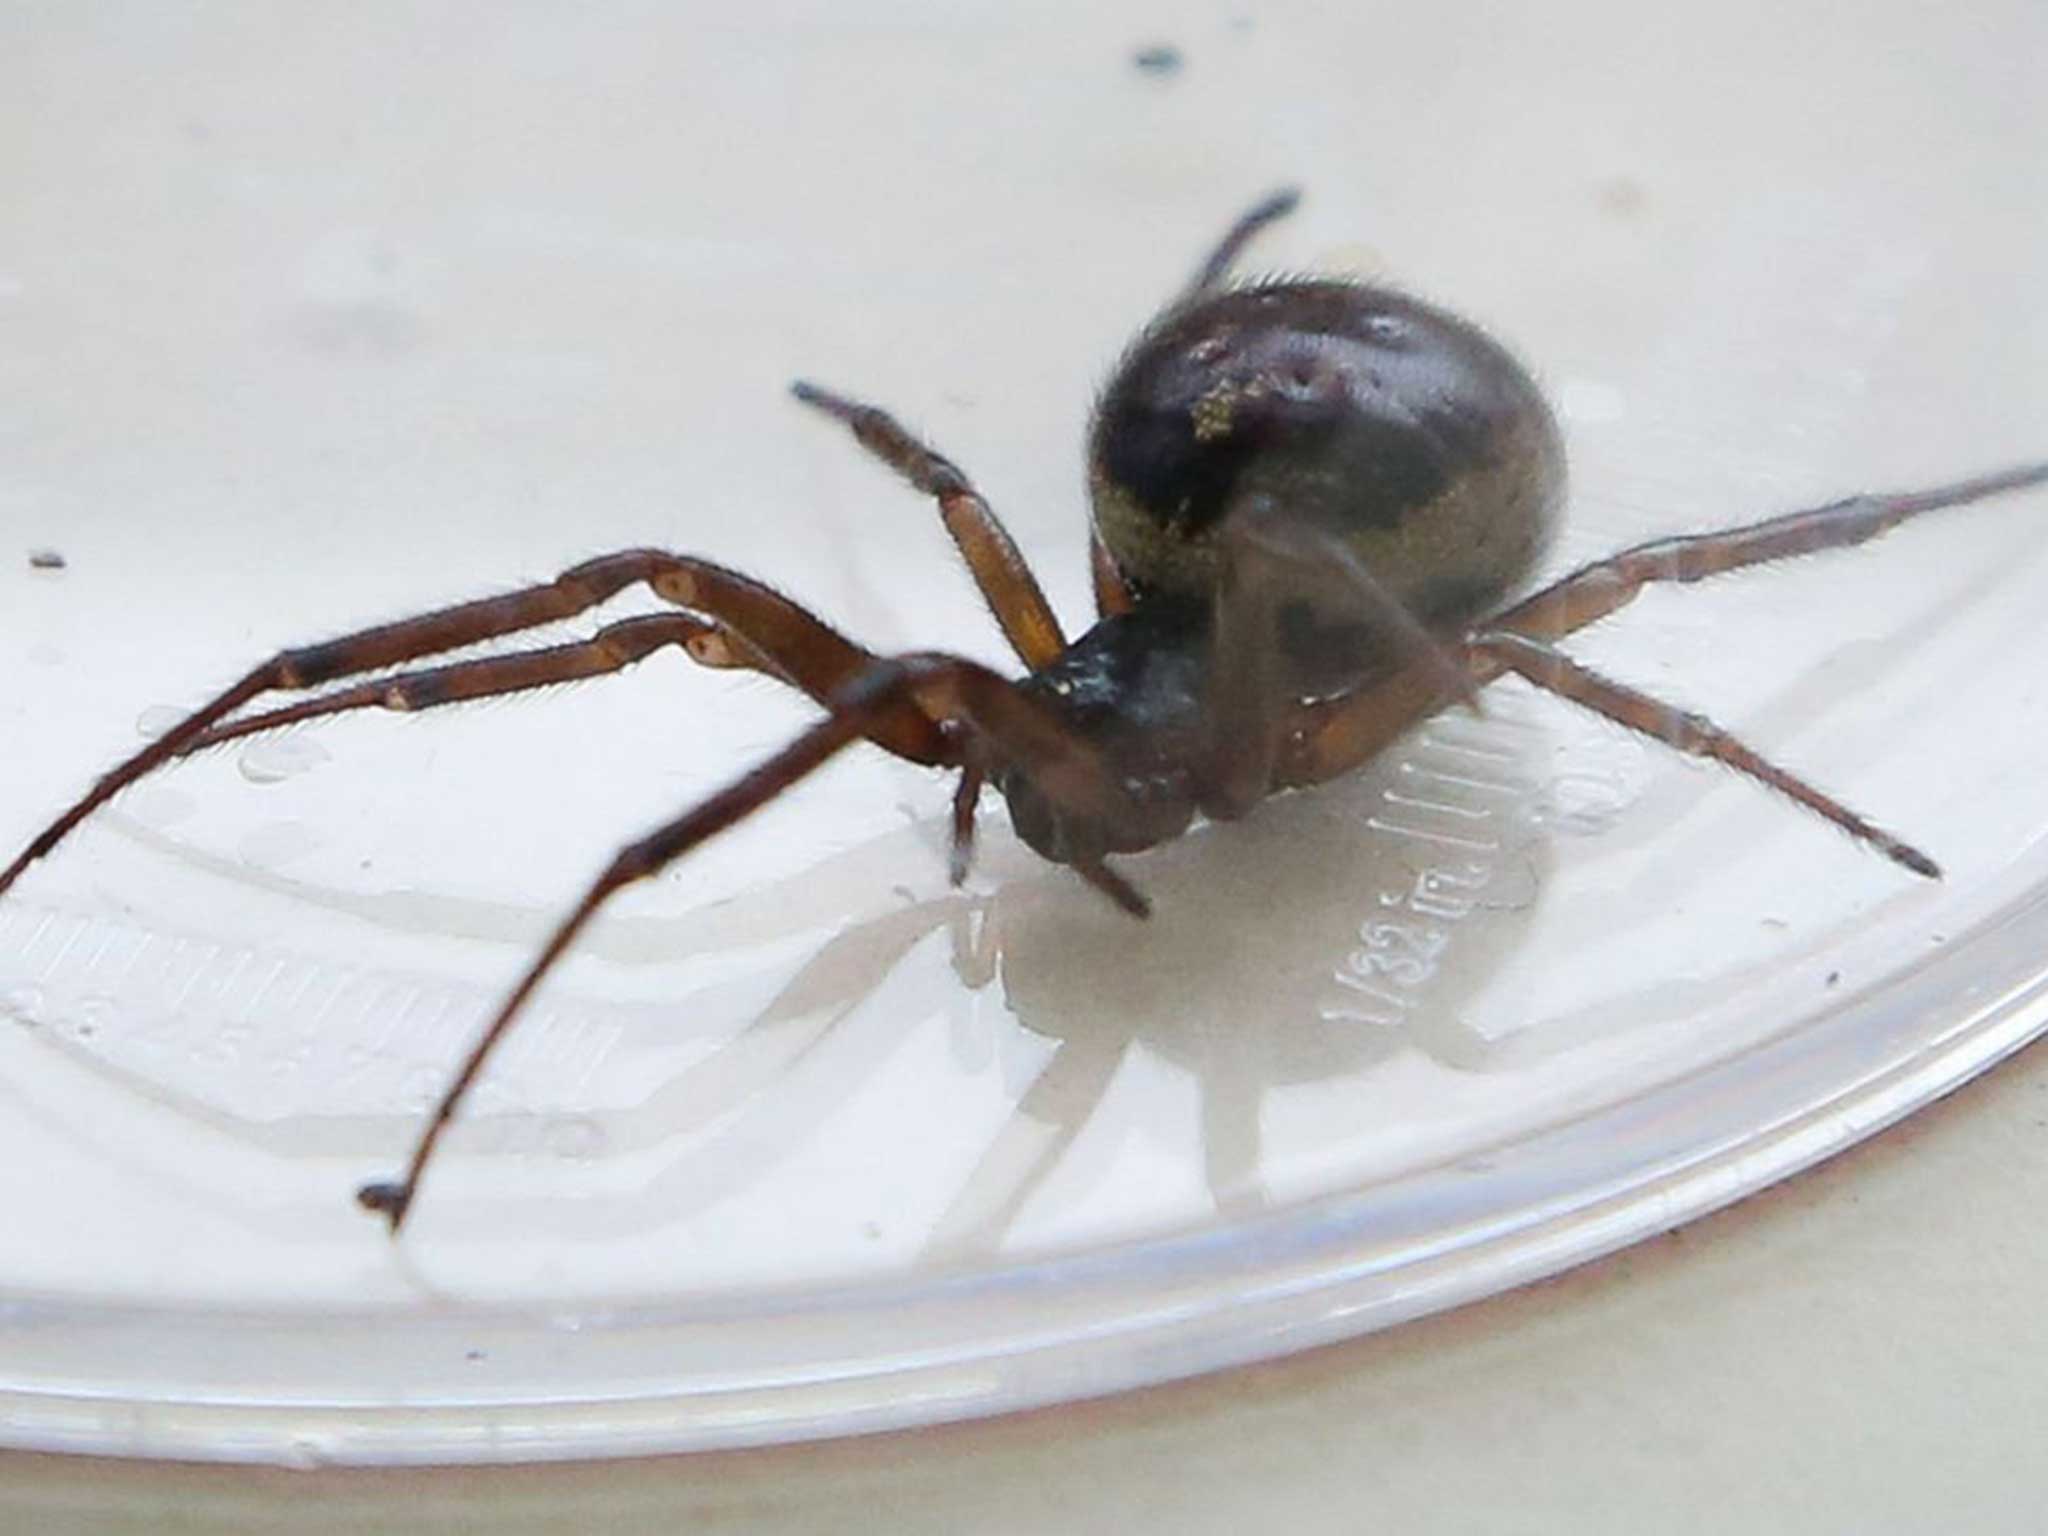 False widow spiders have been found in at least four schools in the Newham area of London